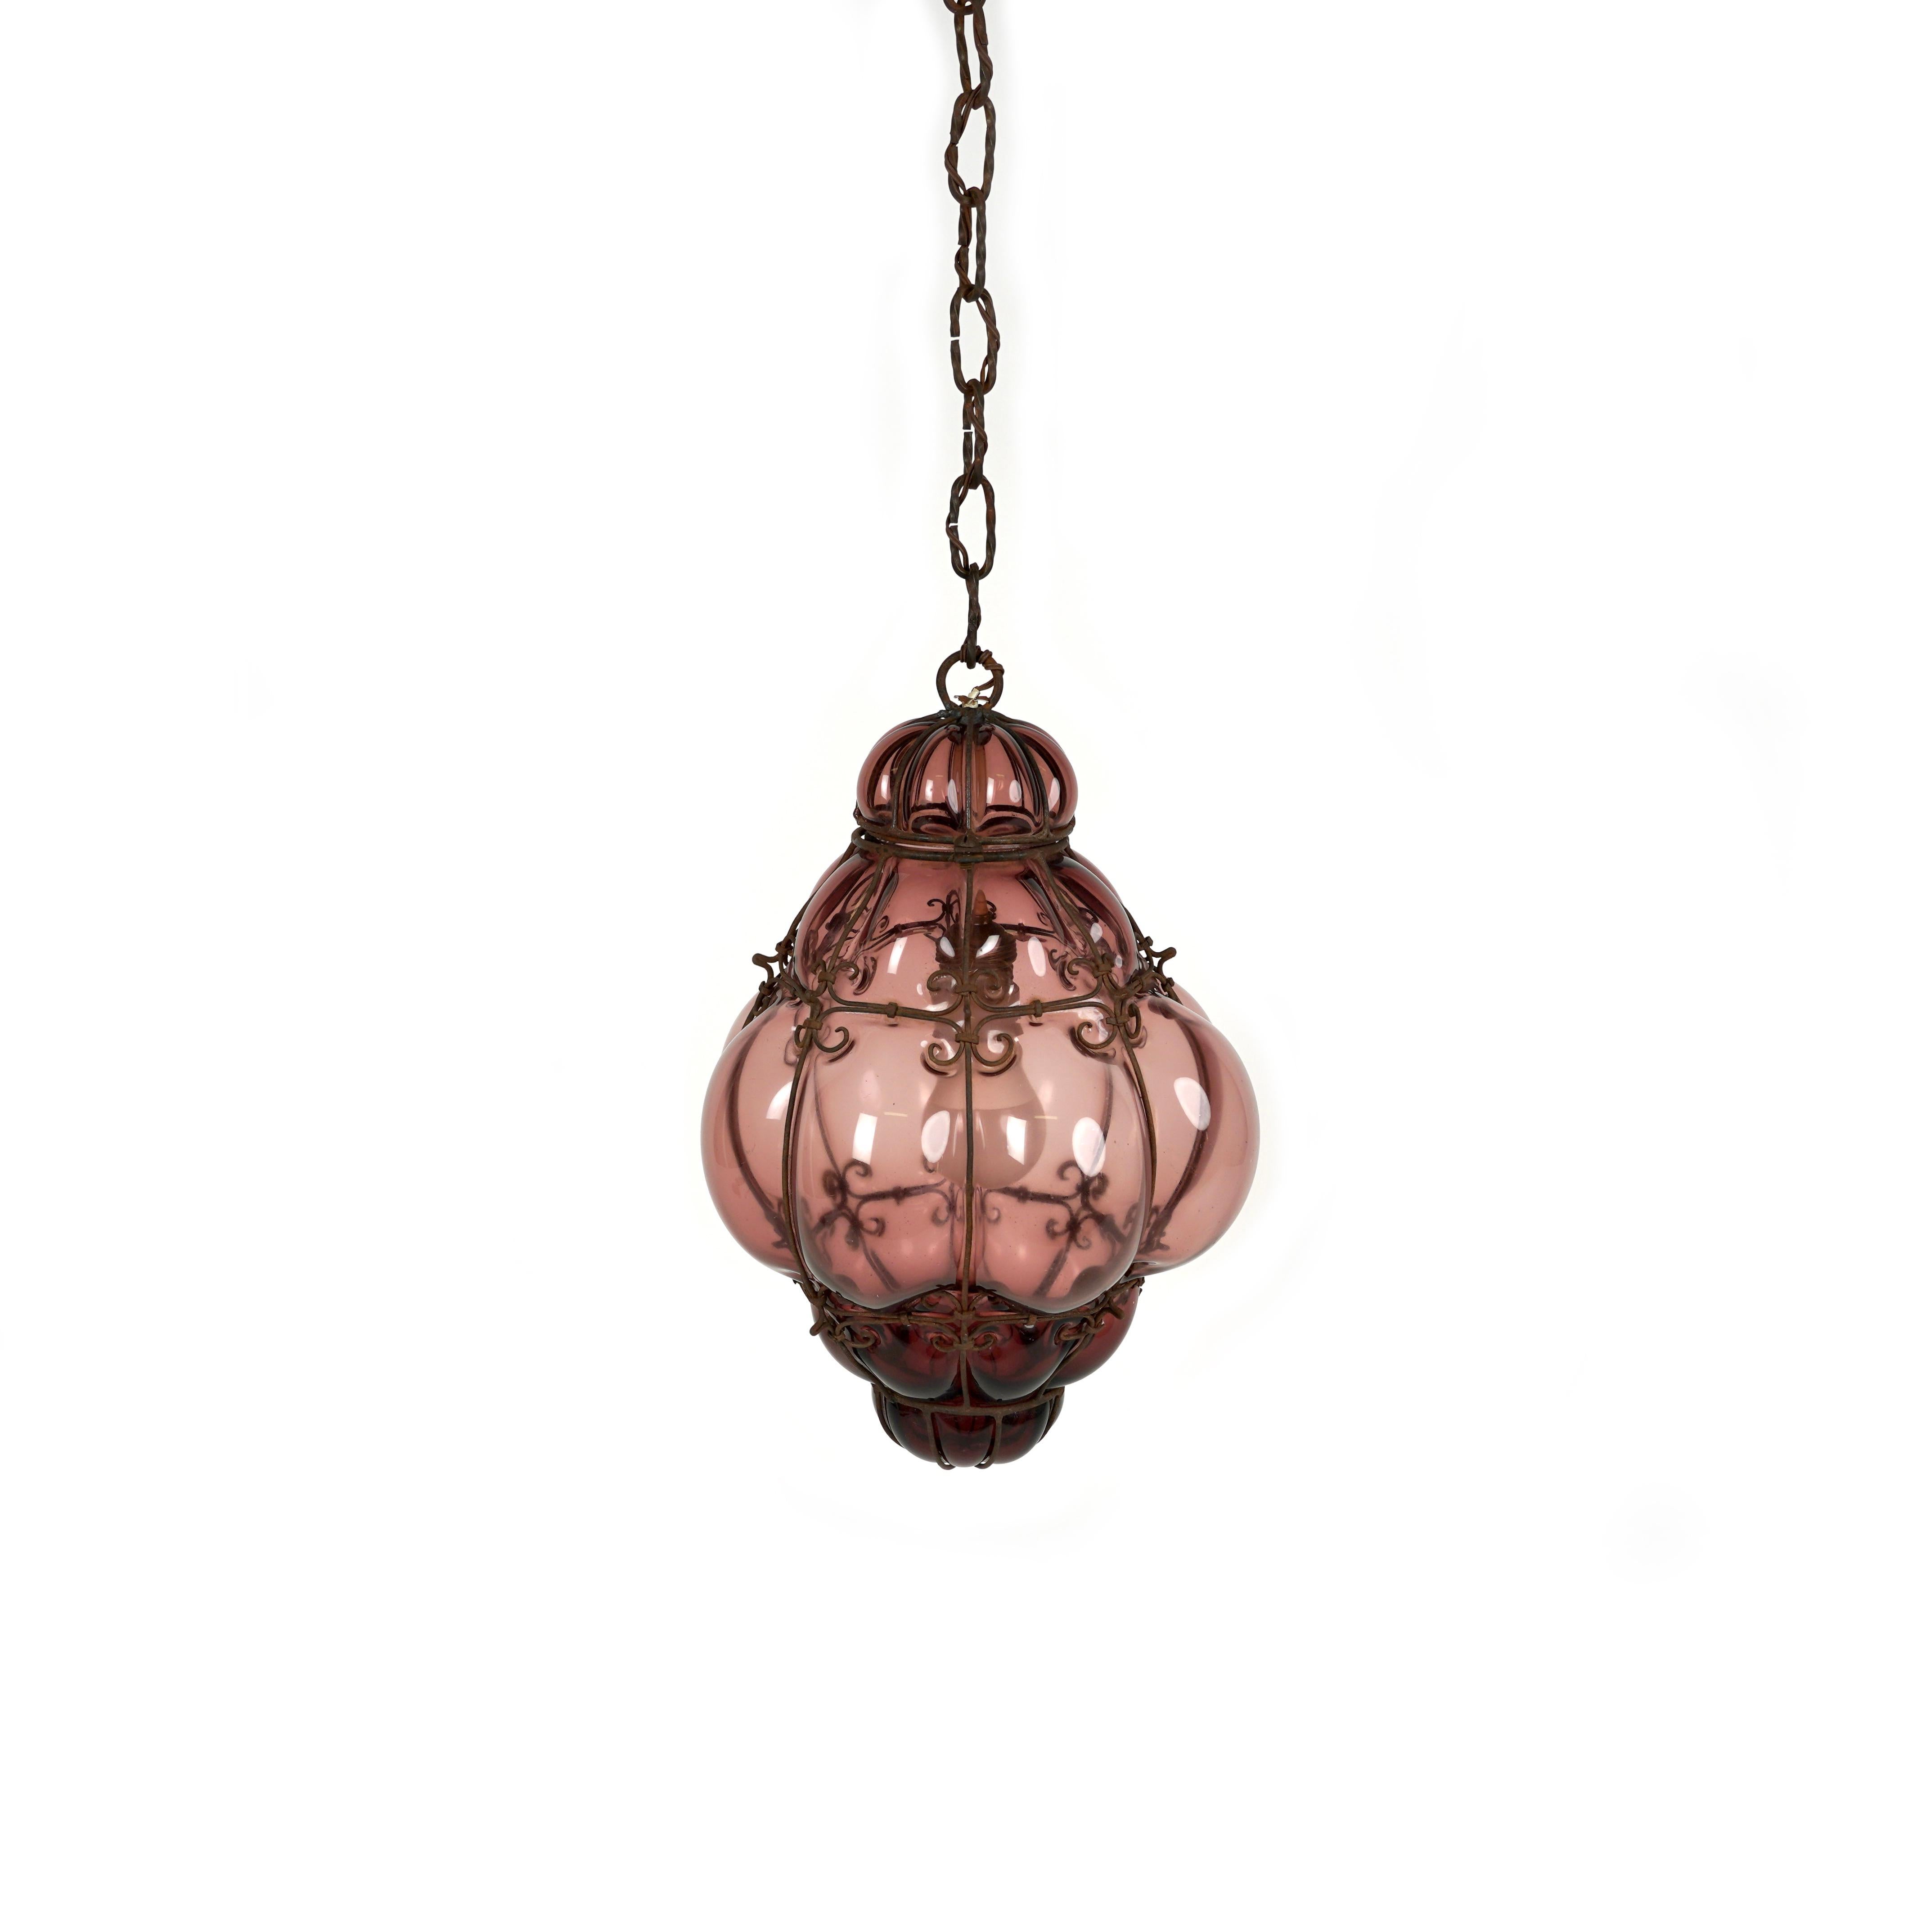 Midcentury beautiful pendant light in dust purple colored murano handblown glass surrounded by a metal cage by the master Venetian Glass Blower Seguso. 

Made in Italy in the 1940s. 

Perfect to hang over your kitchen bench, dining room table or